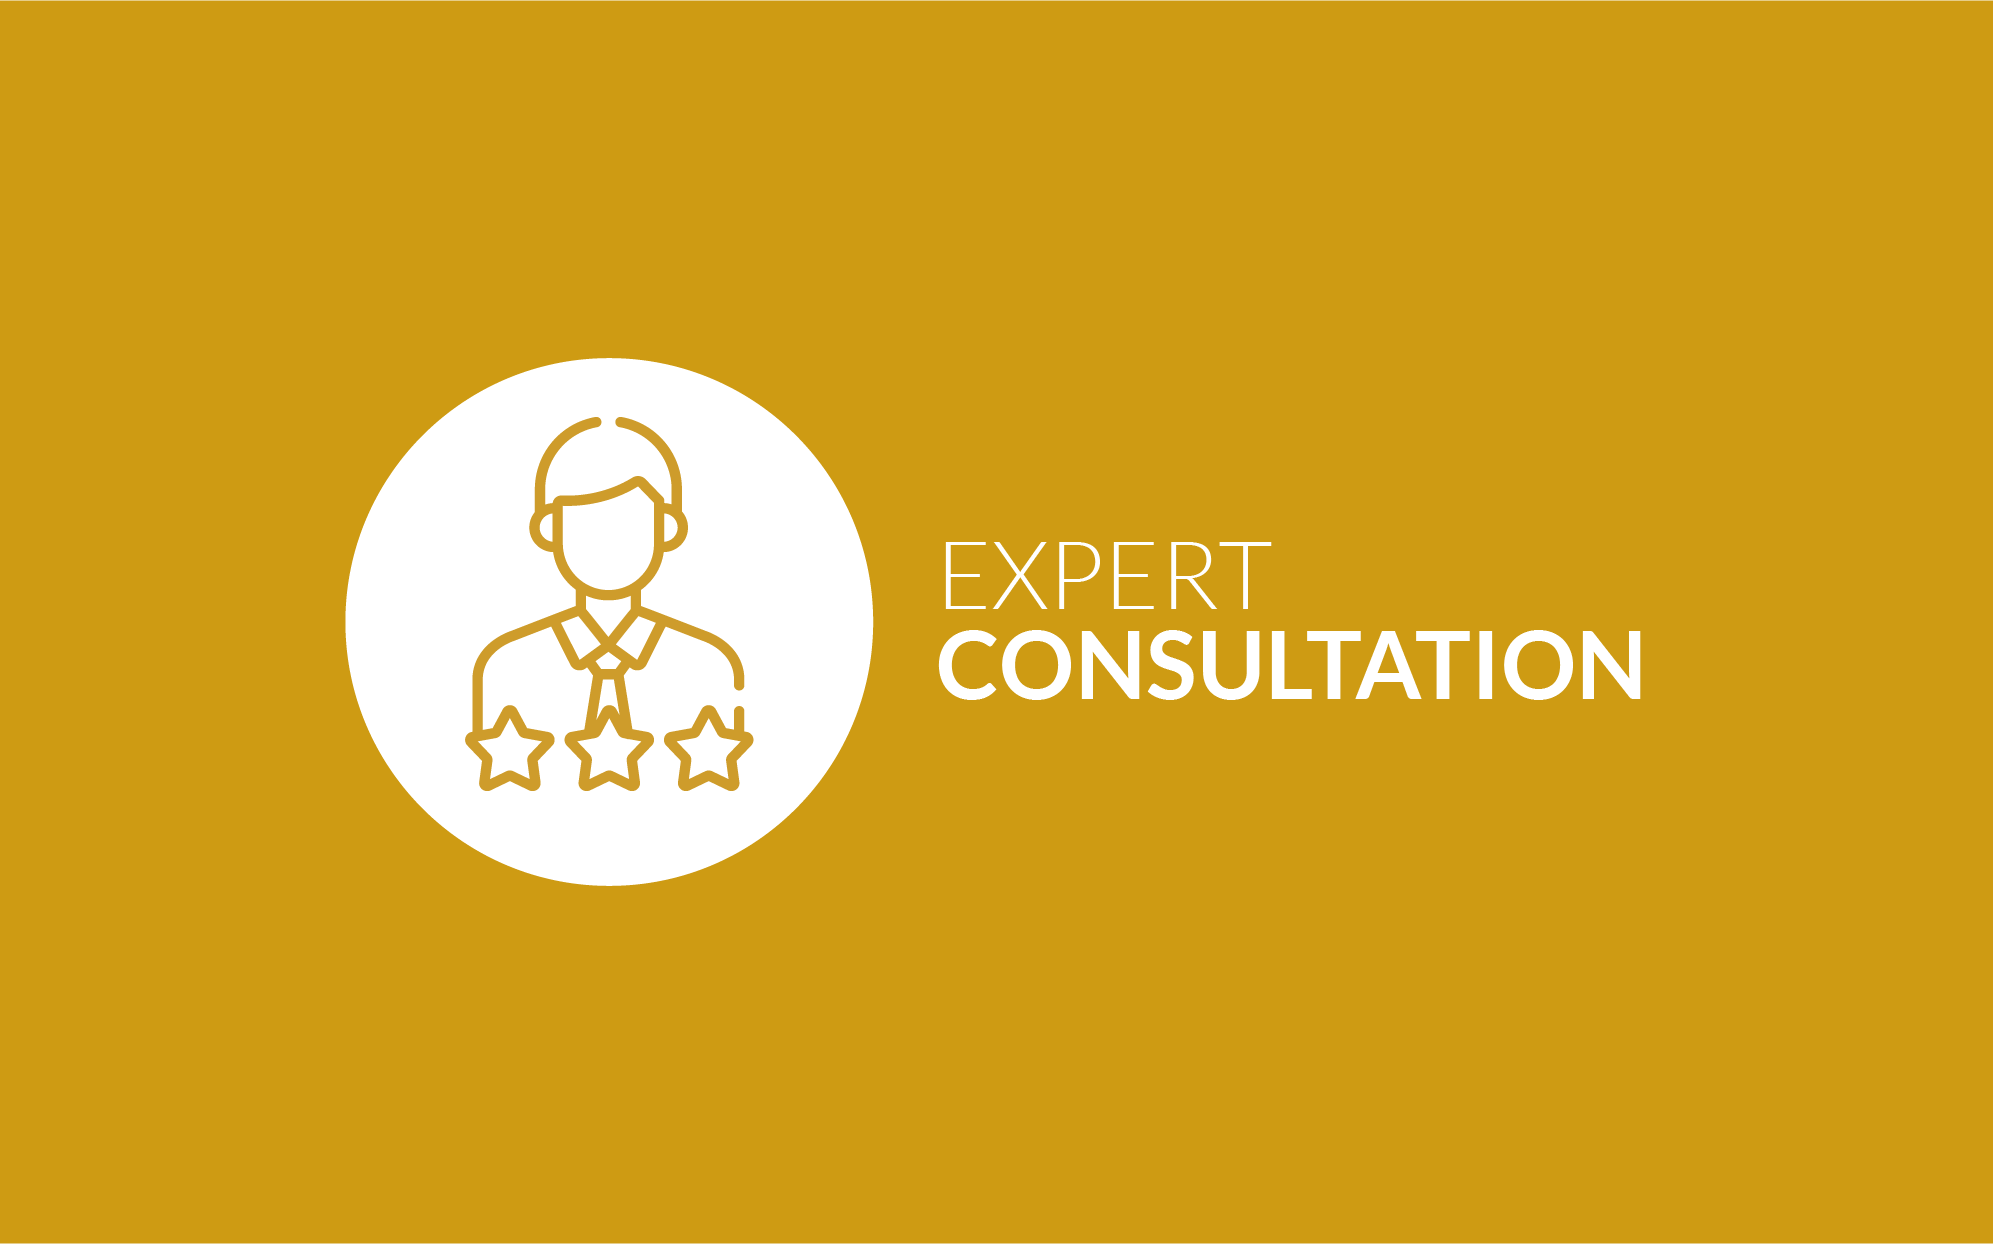 Consultation with experts